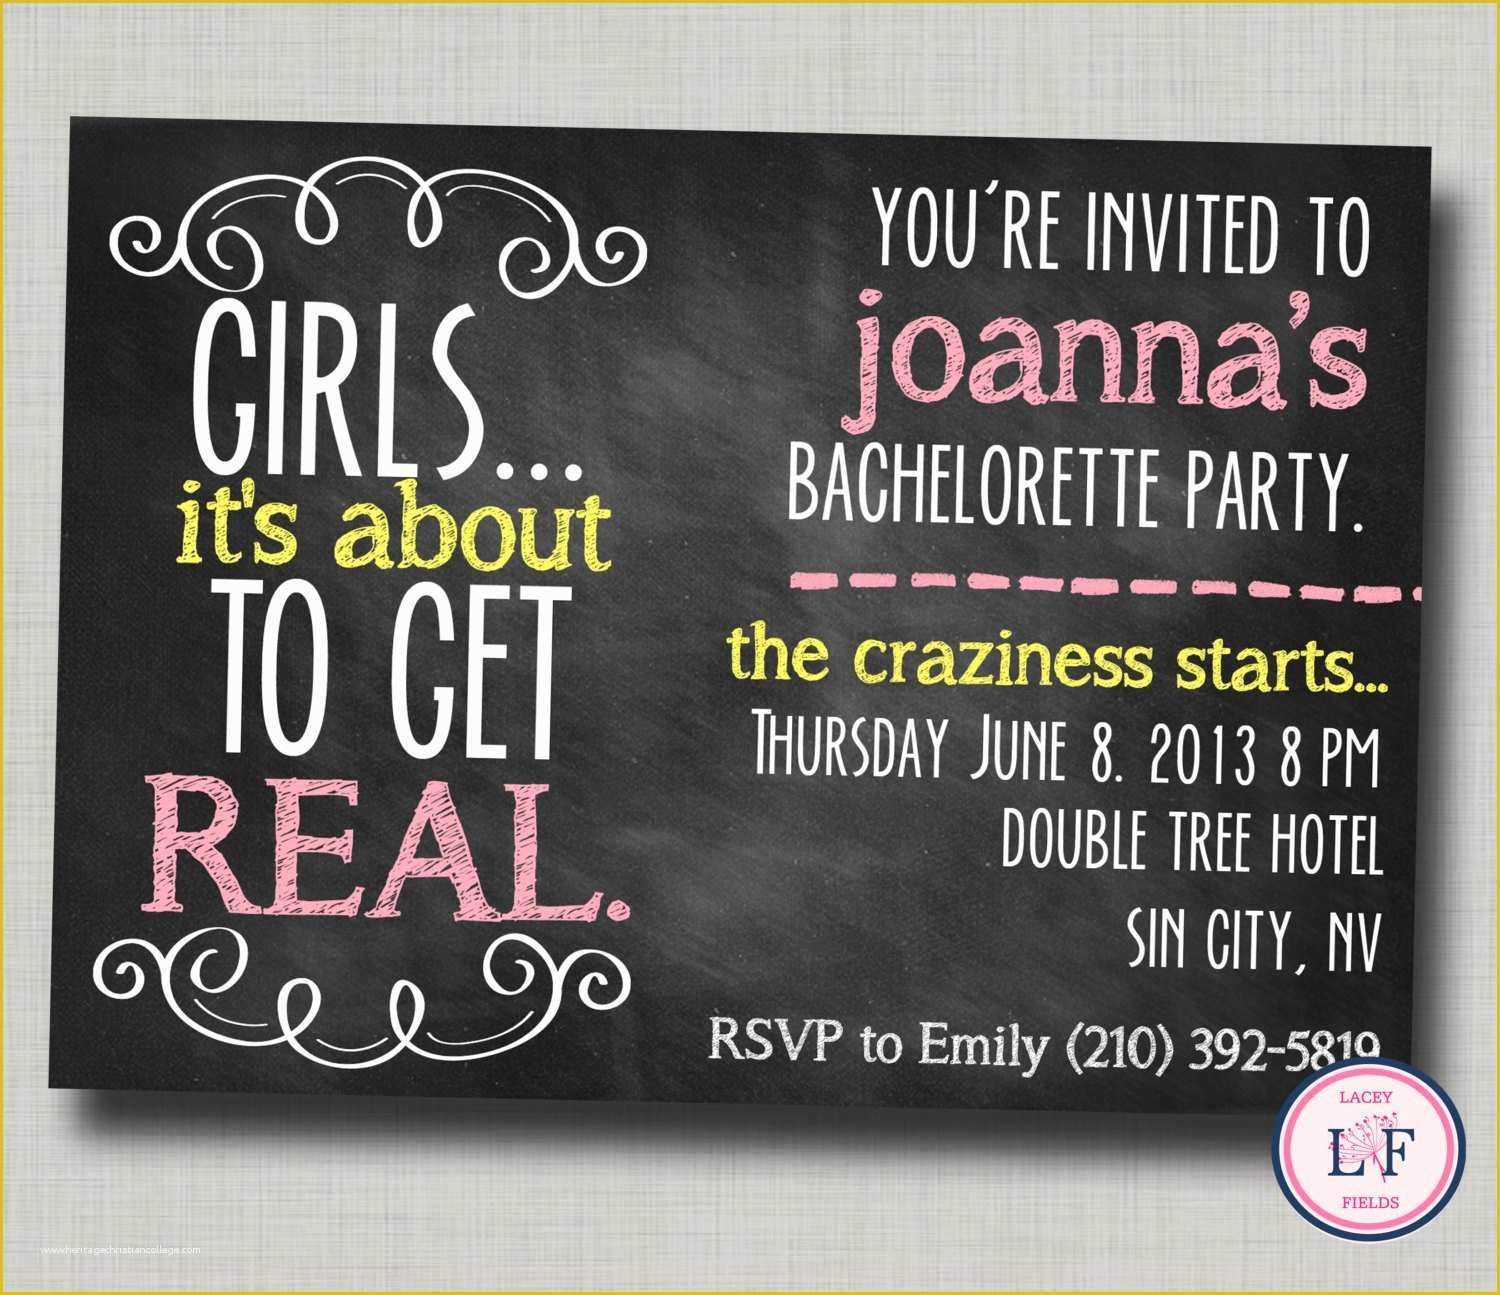 Bachelorette Party Invitation Templates Free Download Of Bachelorette Party Invitation Printable Chalkboard by